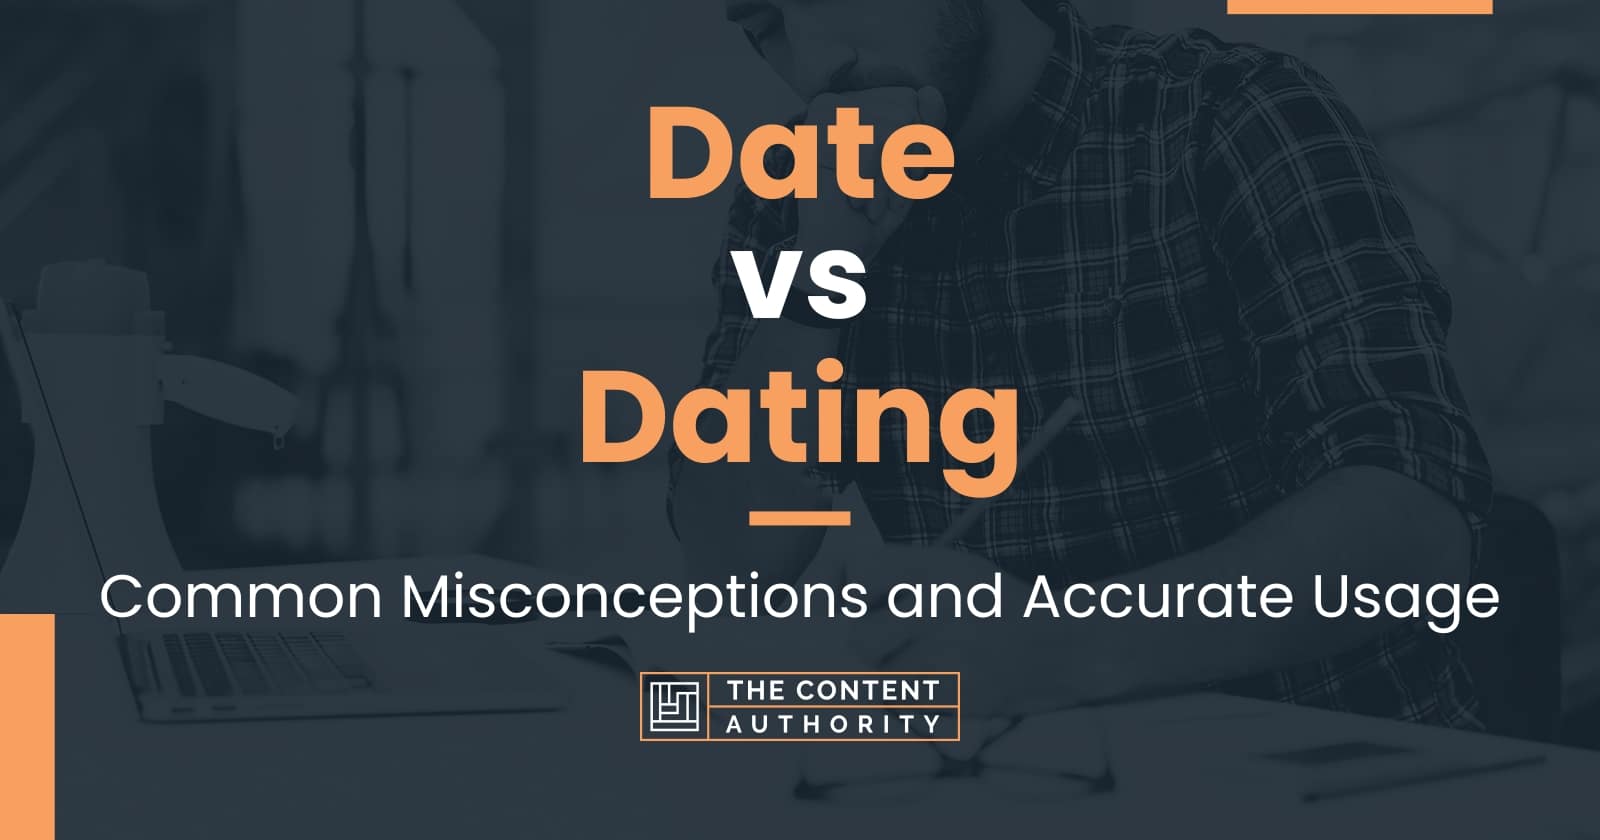 Date Vs Dating Common Misconceptions And Accurate Usage